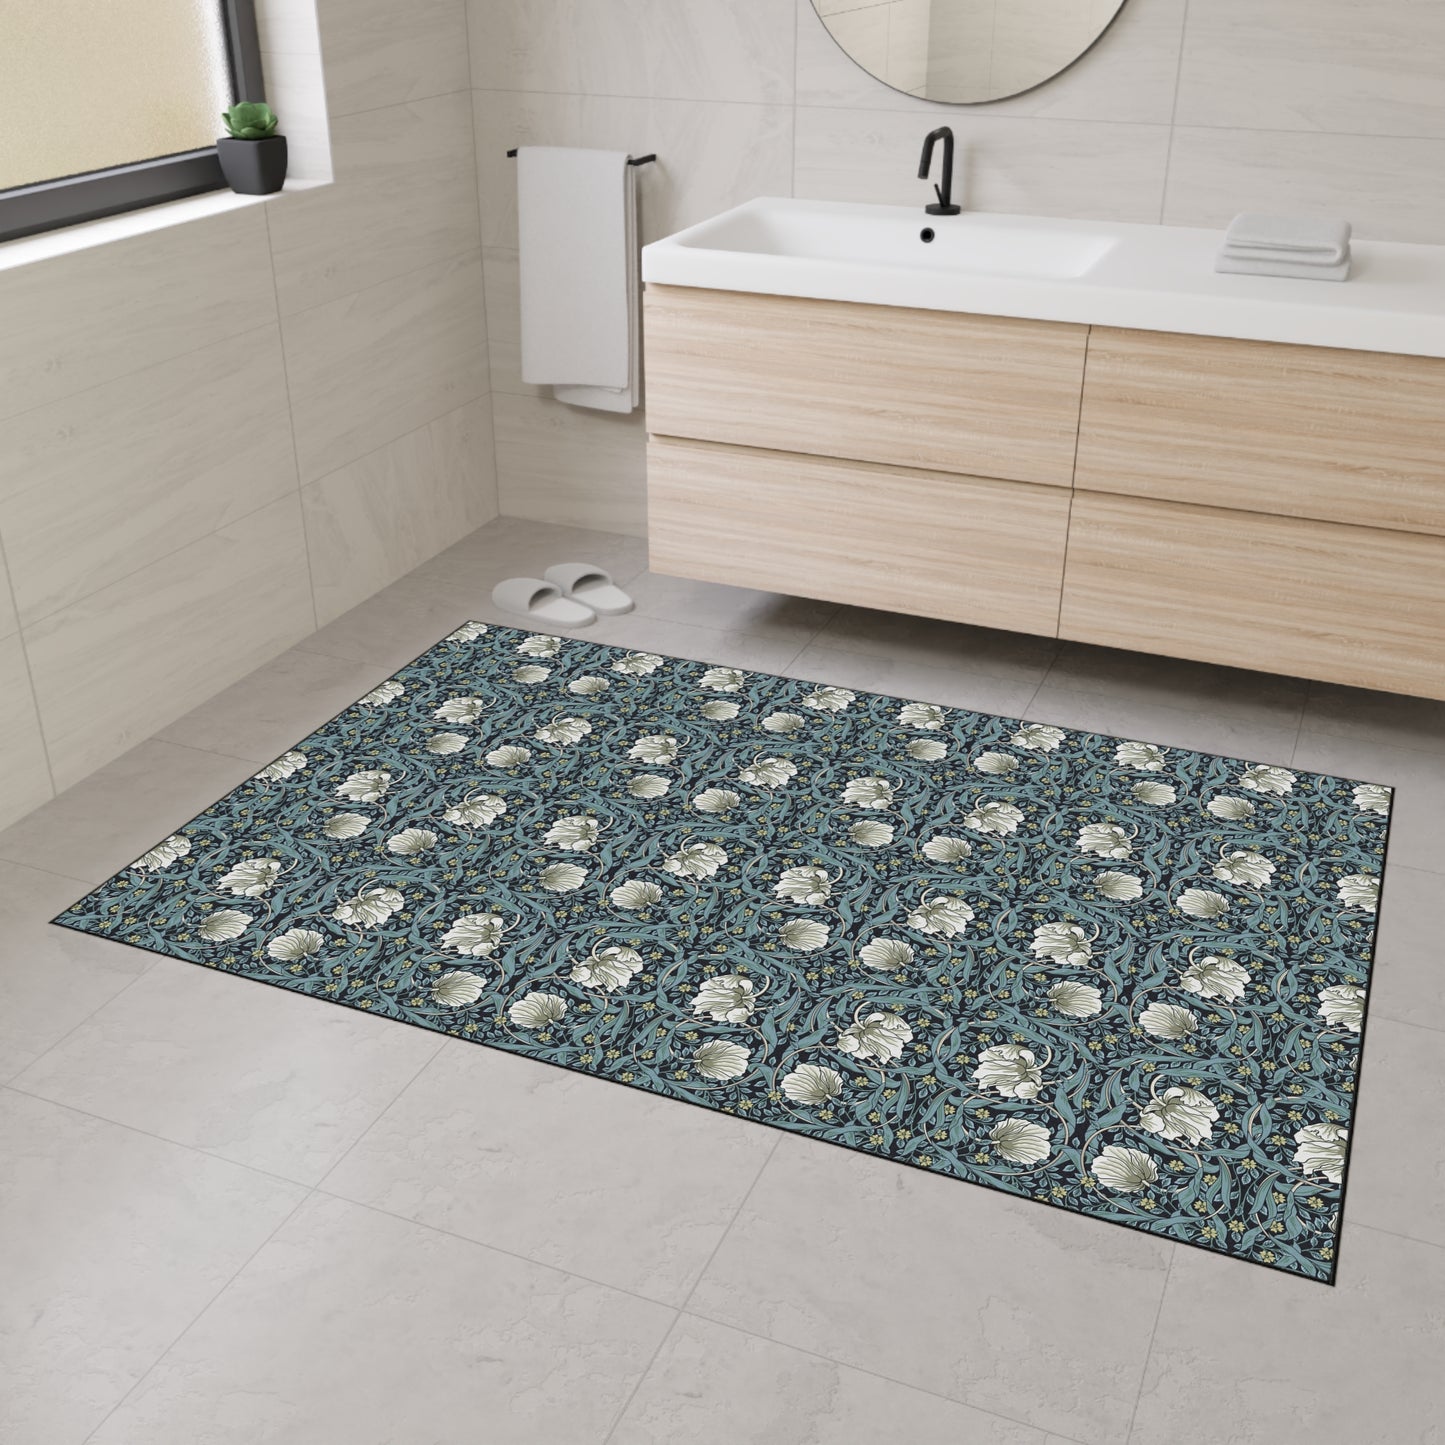 william-morris-co-heavy-duty-floor-mat-pimpernel-collection-slate-8